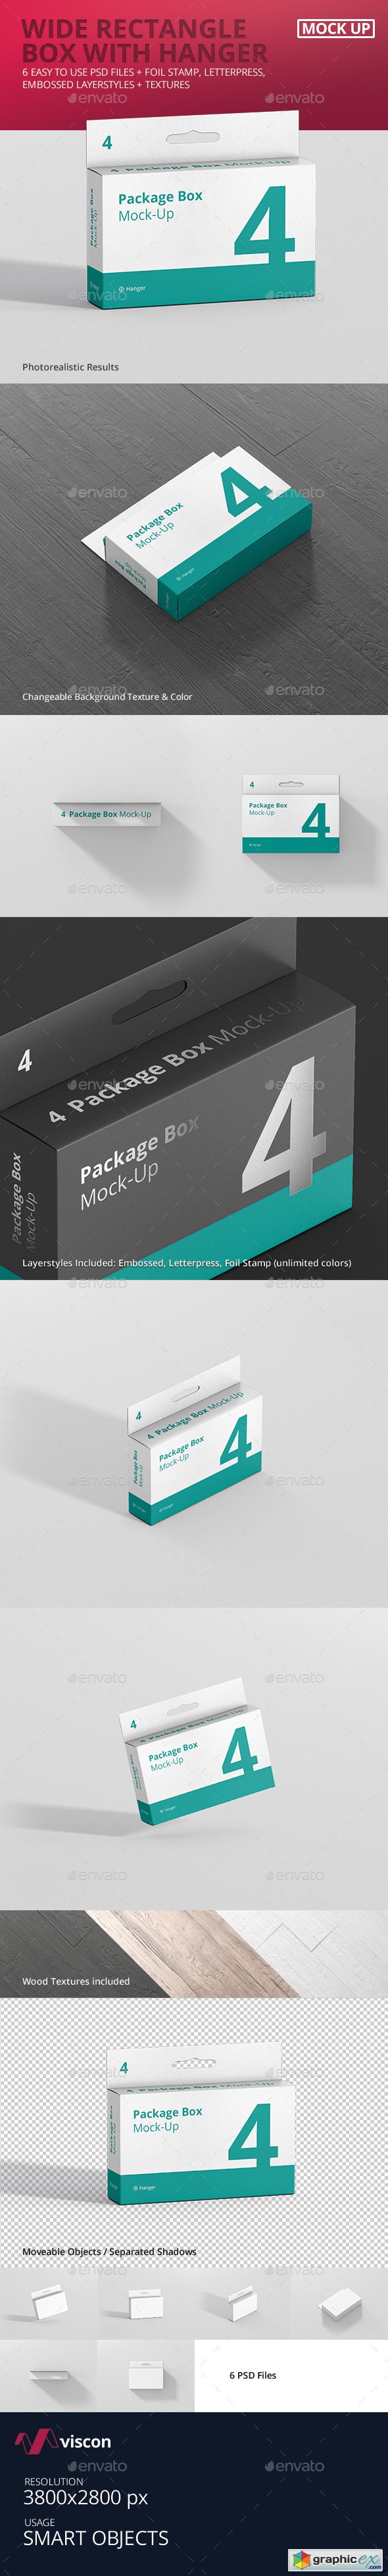 Package Box Mock-Up - Wide Rectangle with Hanger